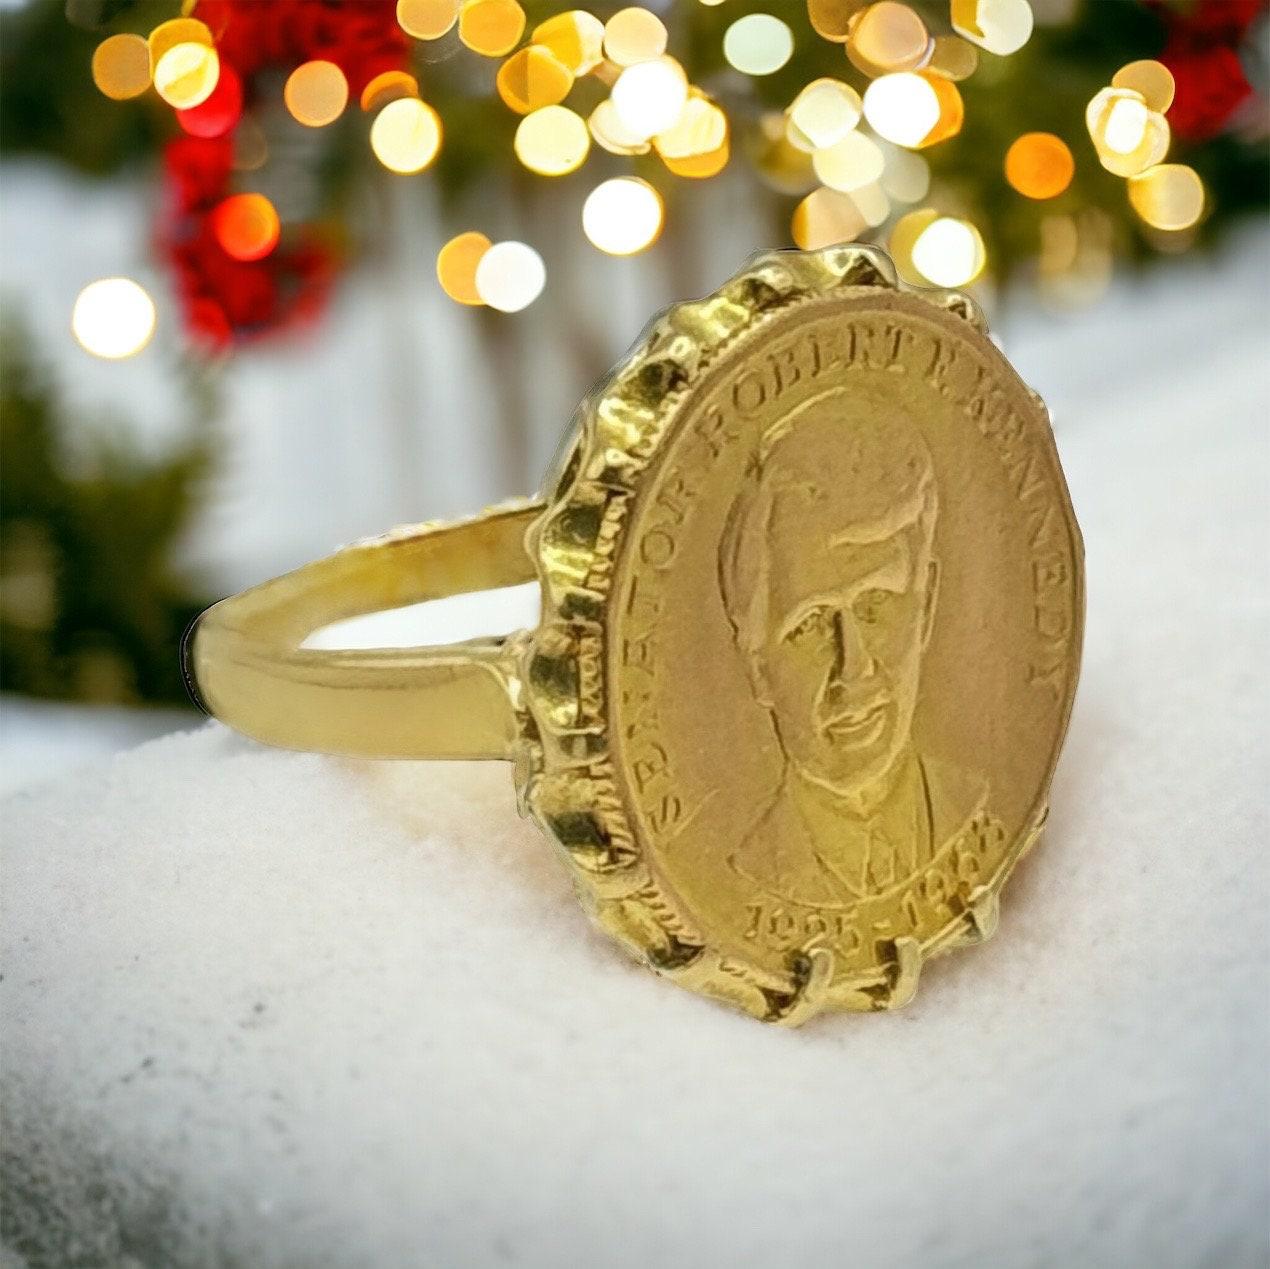 Vintage coin ring with a collectible 21K gold medal honoured Robert F. Kennedy, surrounded by 18K gold support.

The obverse of the medal features a bust of Robert F. Kennedy. The words 